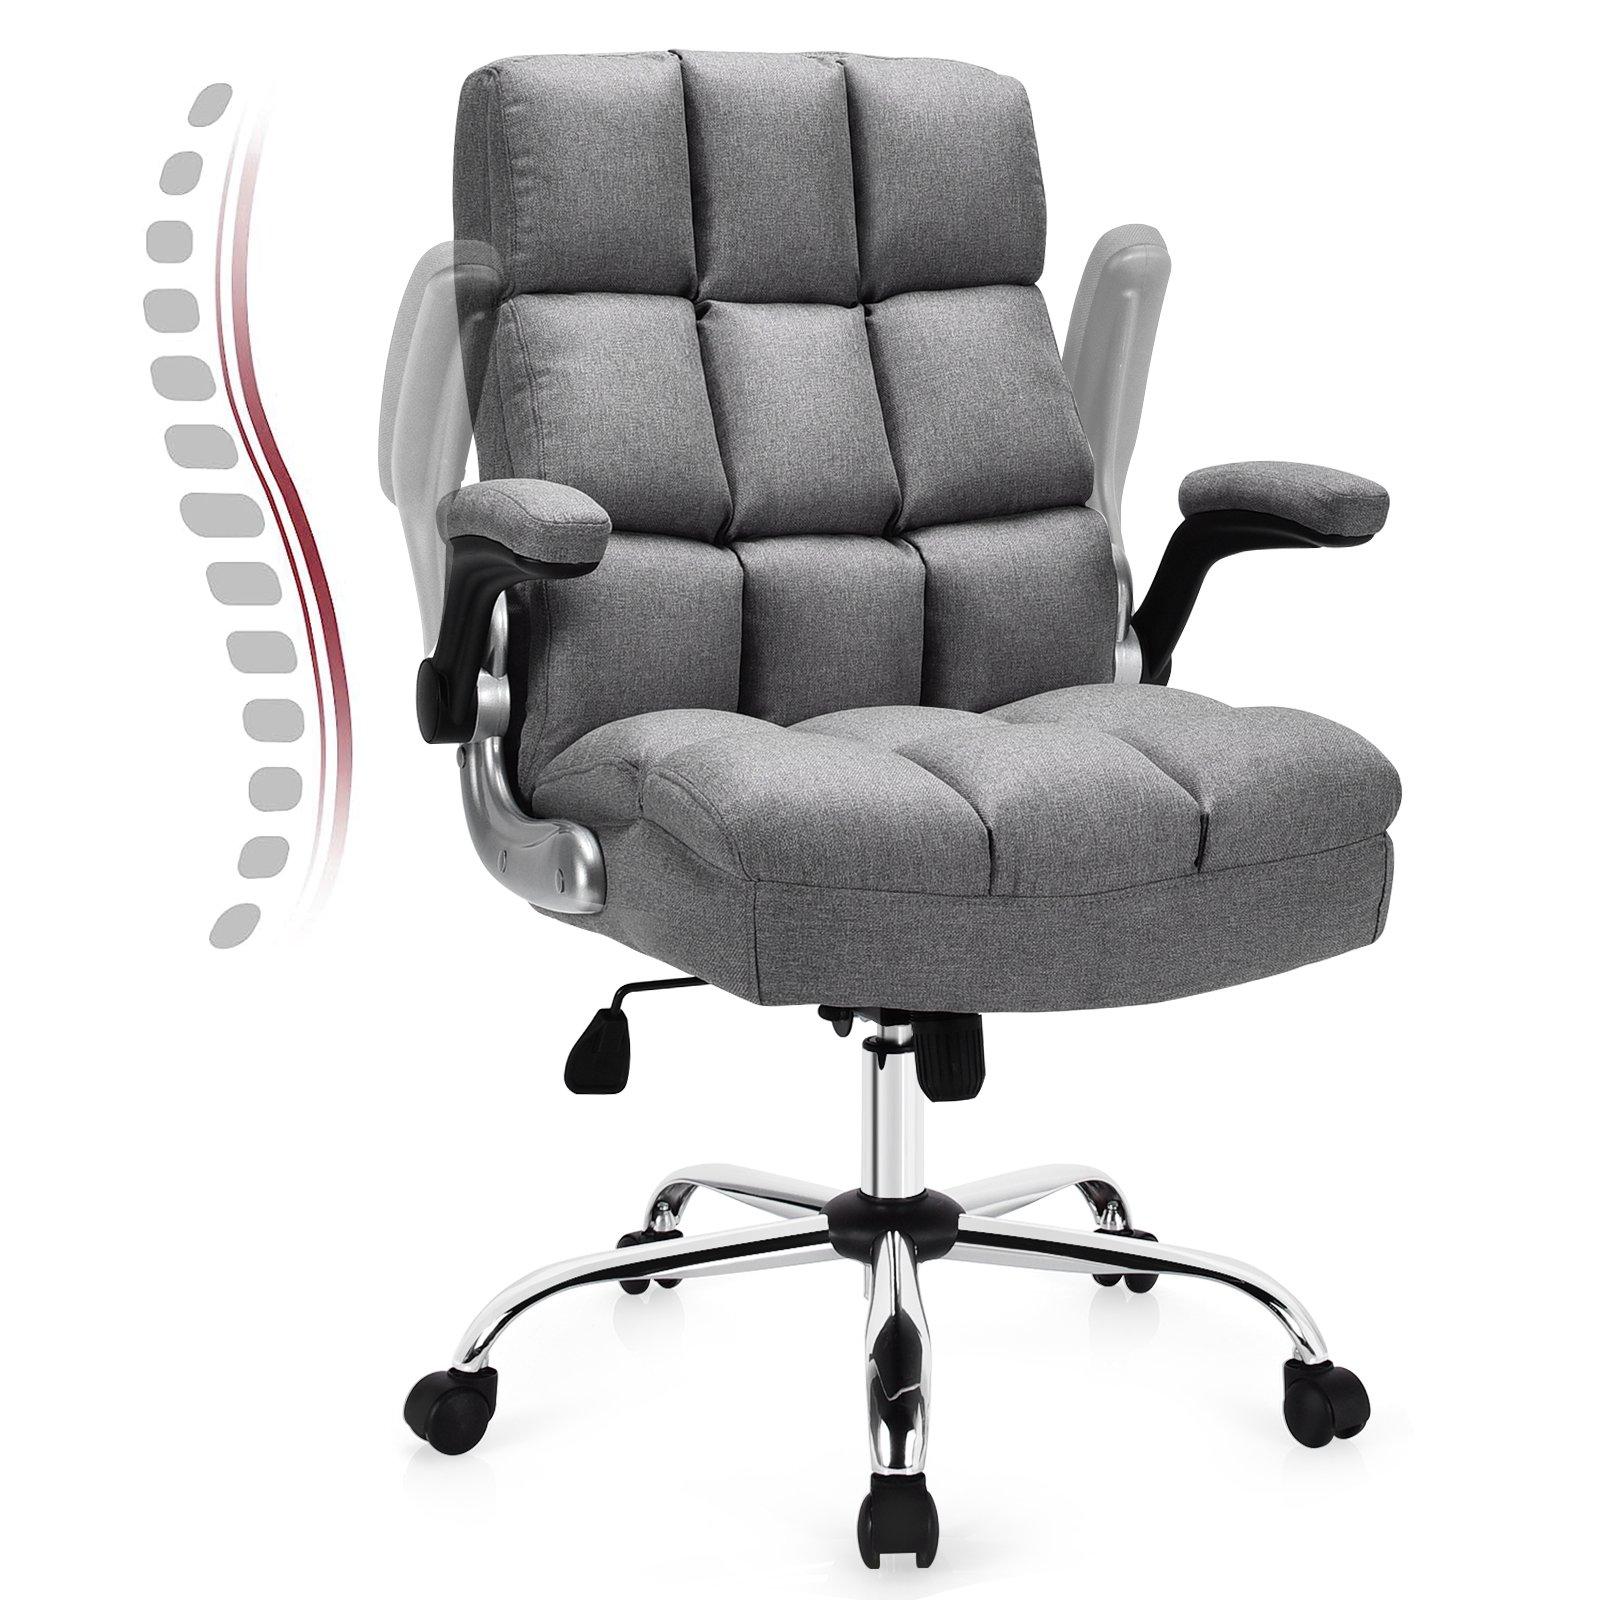 Executive Office Chair Ergonomic Padded High Back Swivel Computer Desk Chairs